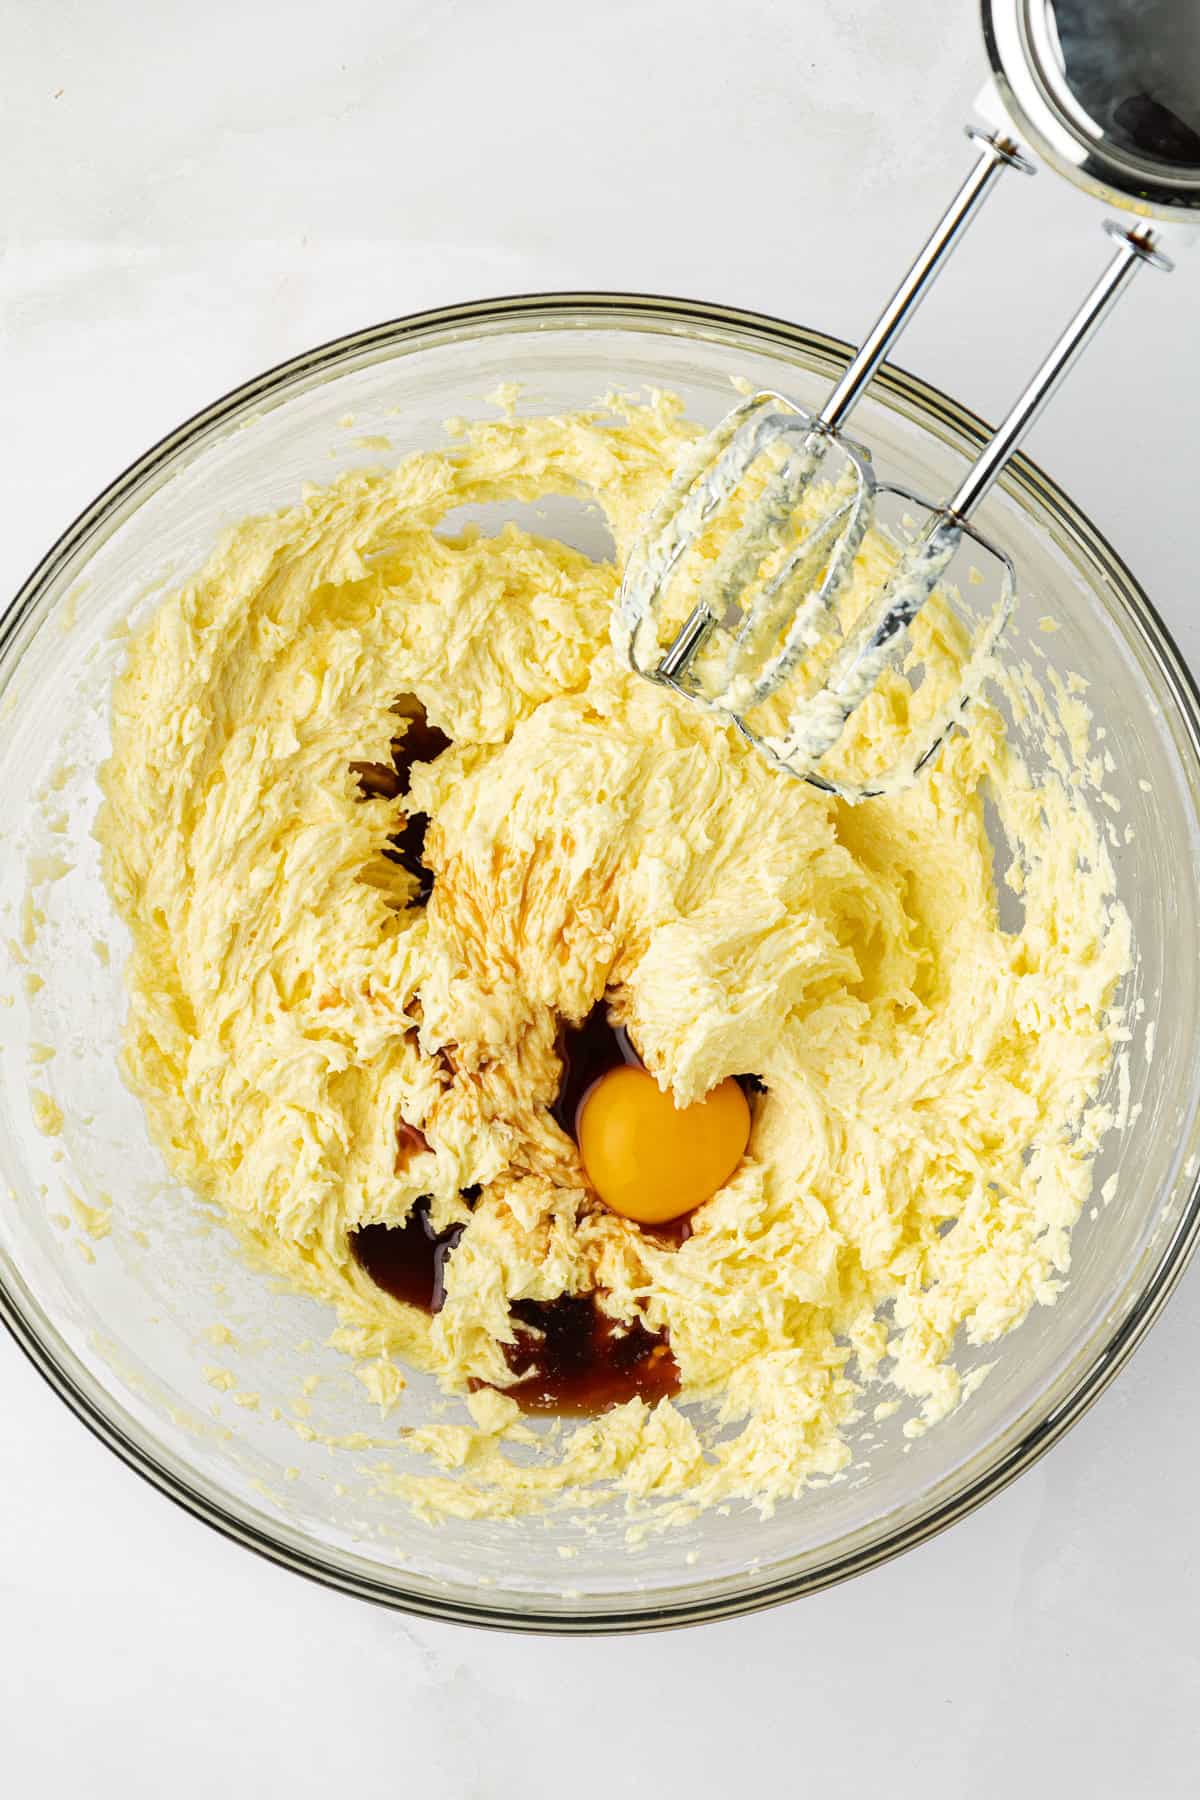 a mixture of butter and sugar with eggs and vanilla extract on top, not mixed in yet, with an electric mixer leaning on the side of the bowl